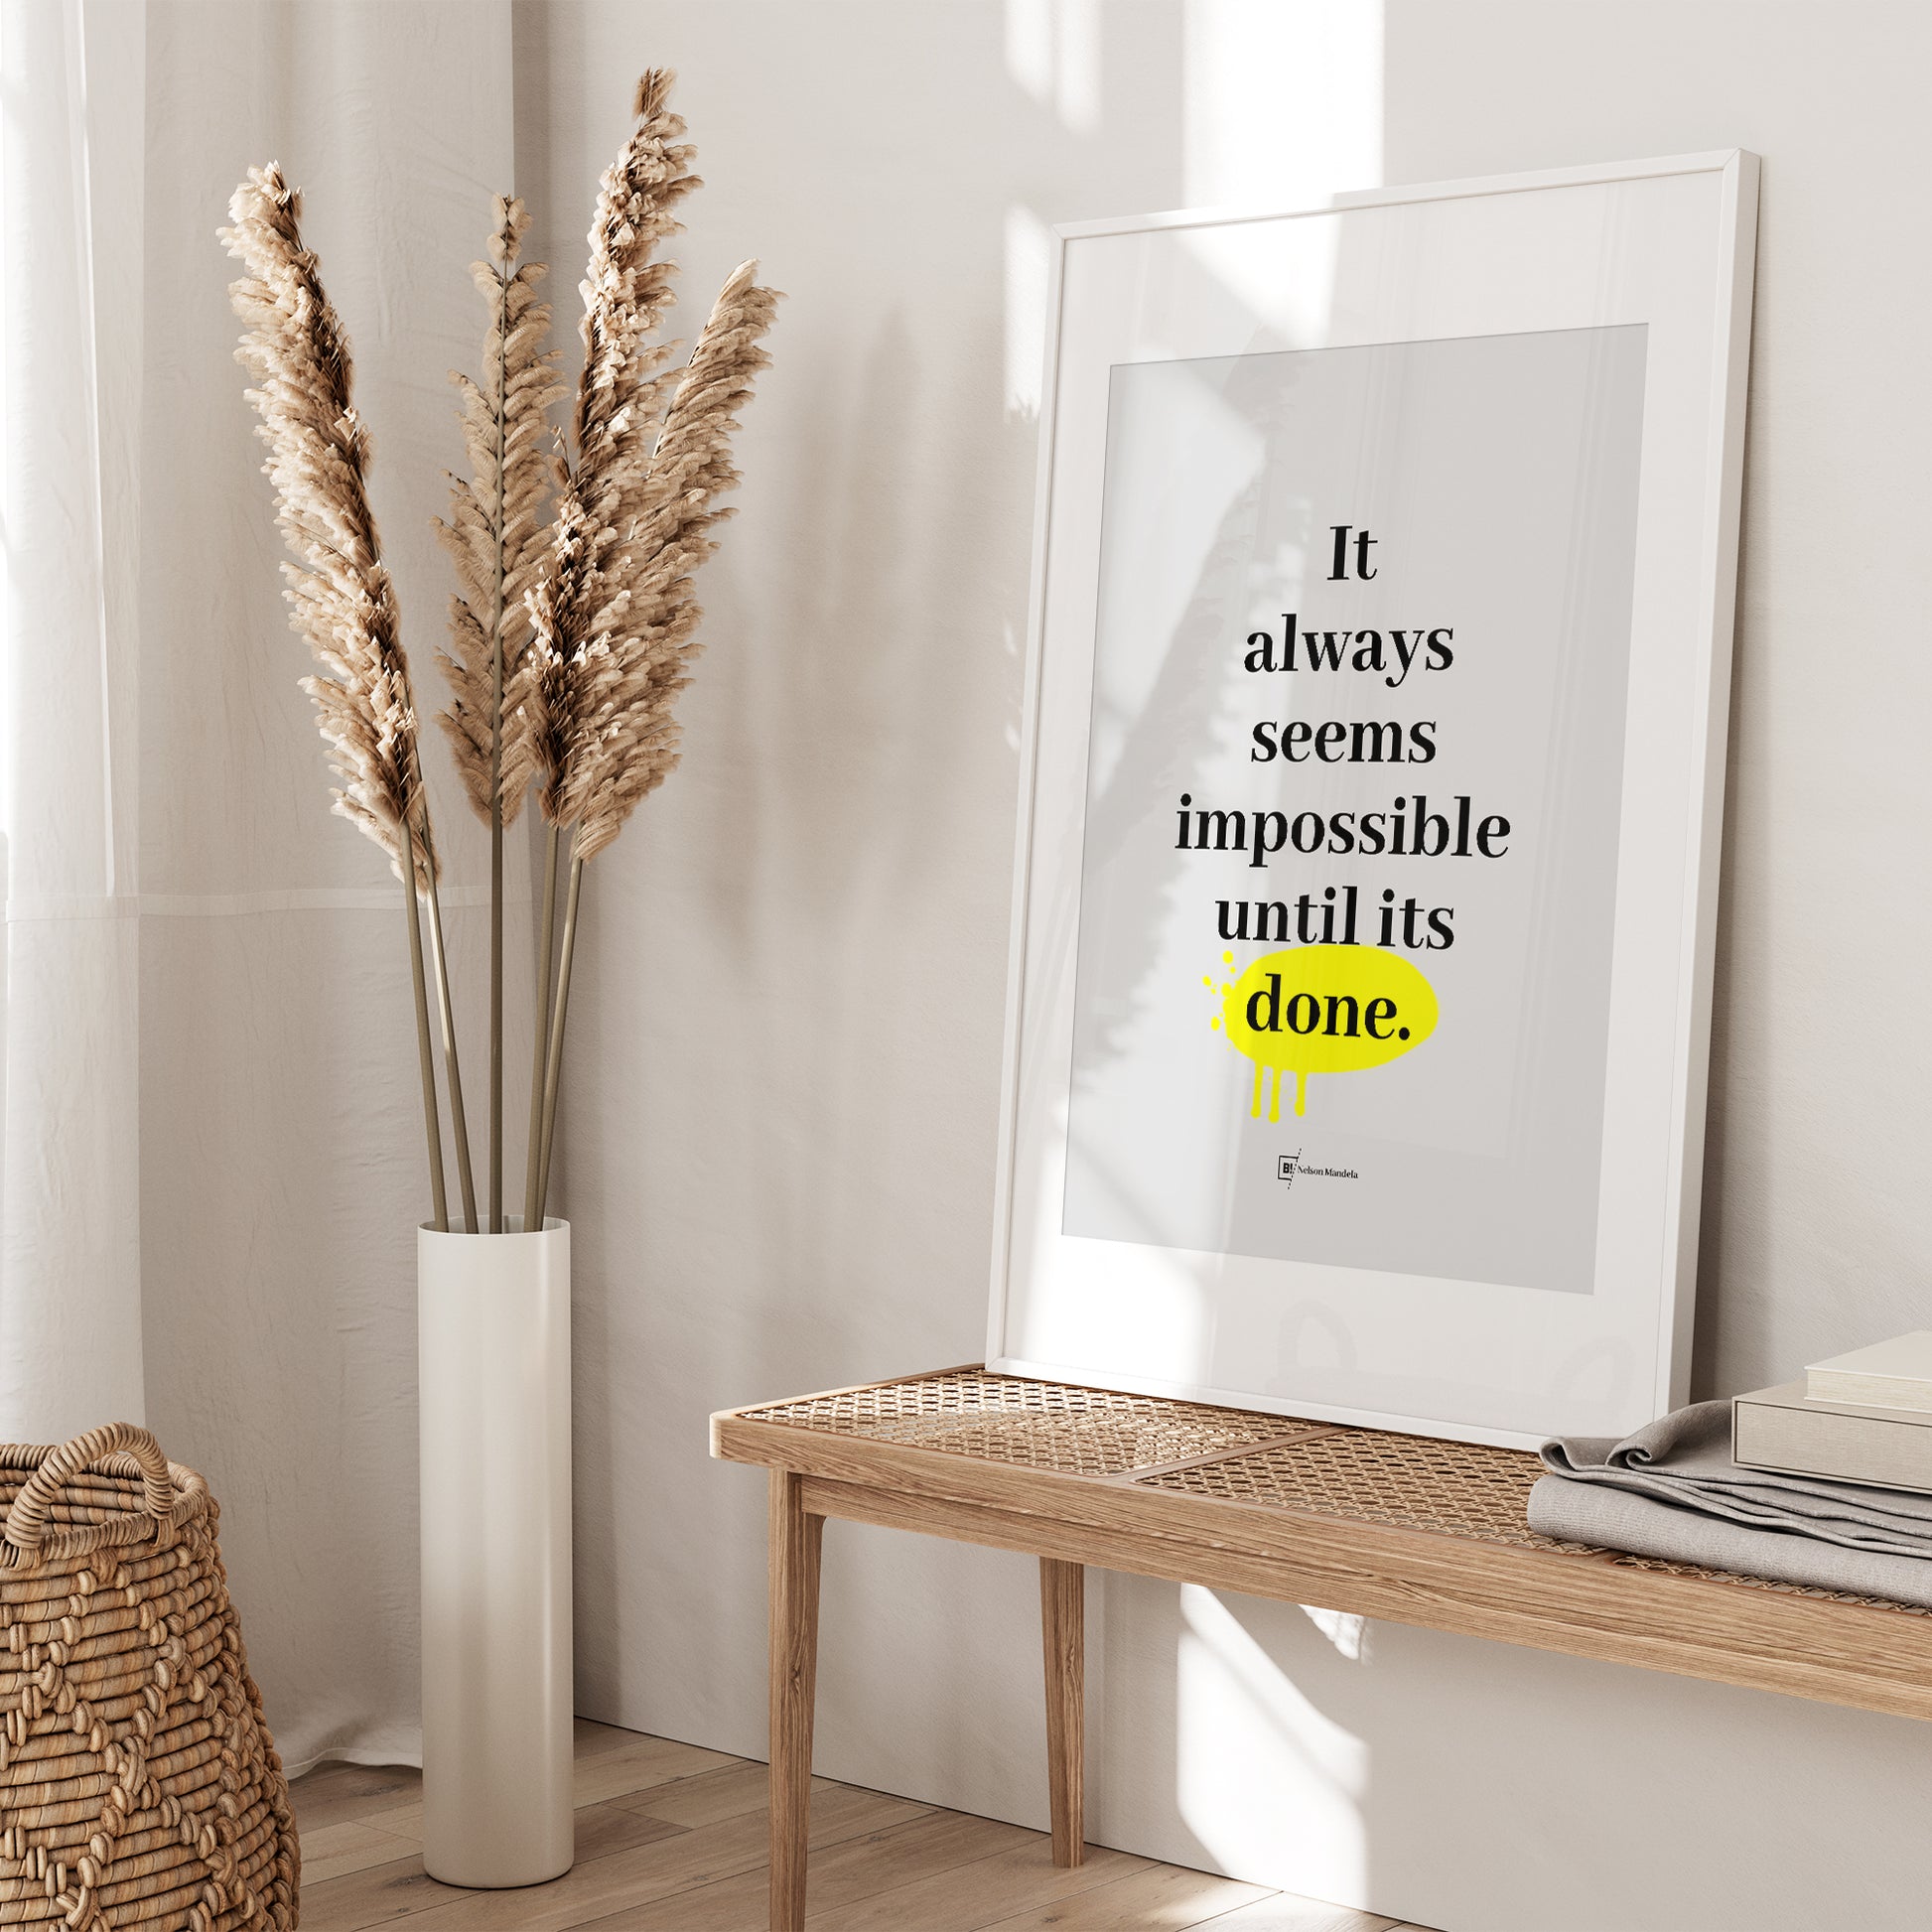 Be inspired by Nelson Mandela's famous "It always seems impossible until its done" quote art print. This artwork was printed using the giclée process on archival acid-free paper and is presented in a white frame with passe-partout that captures its timeless beauty in every detail.